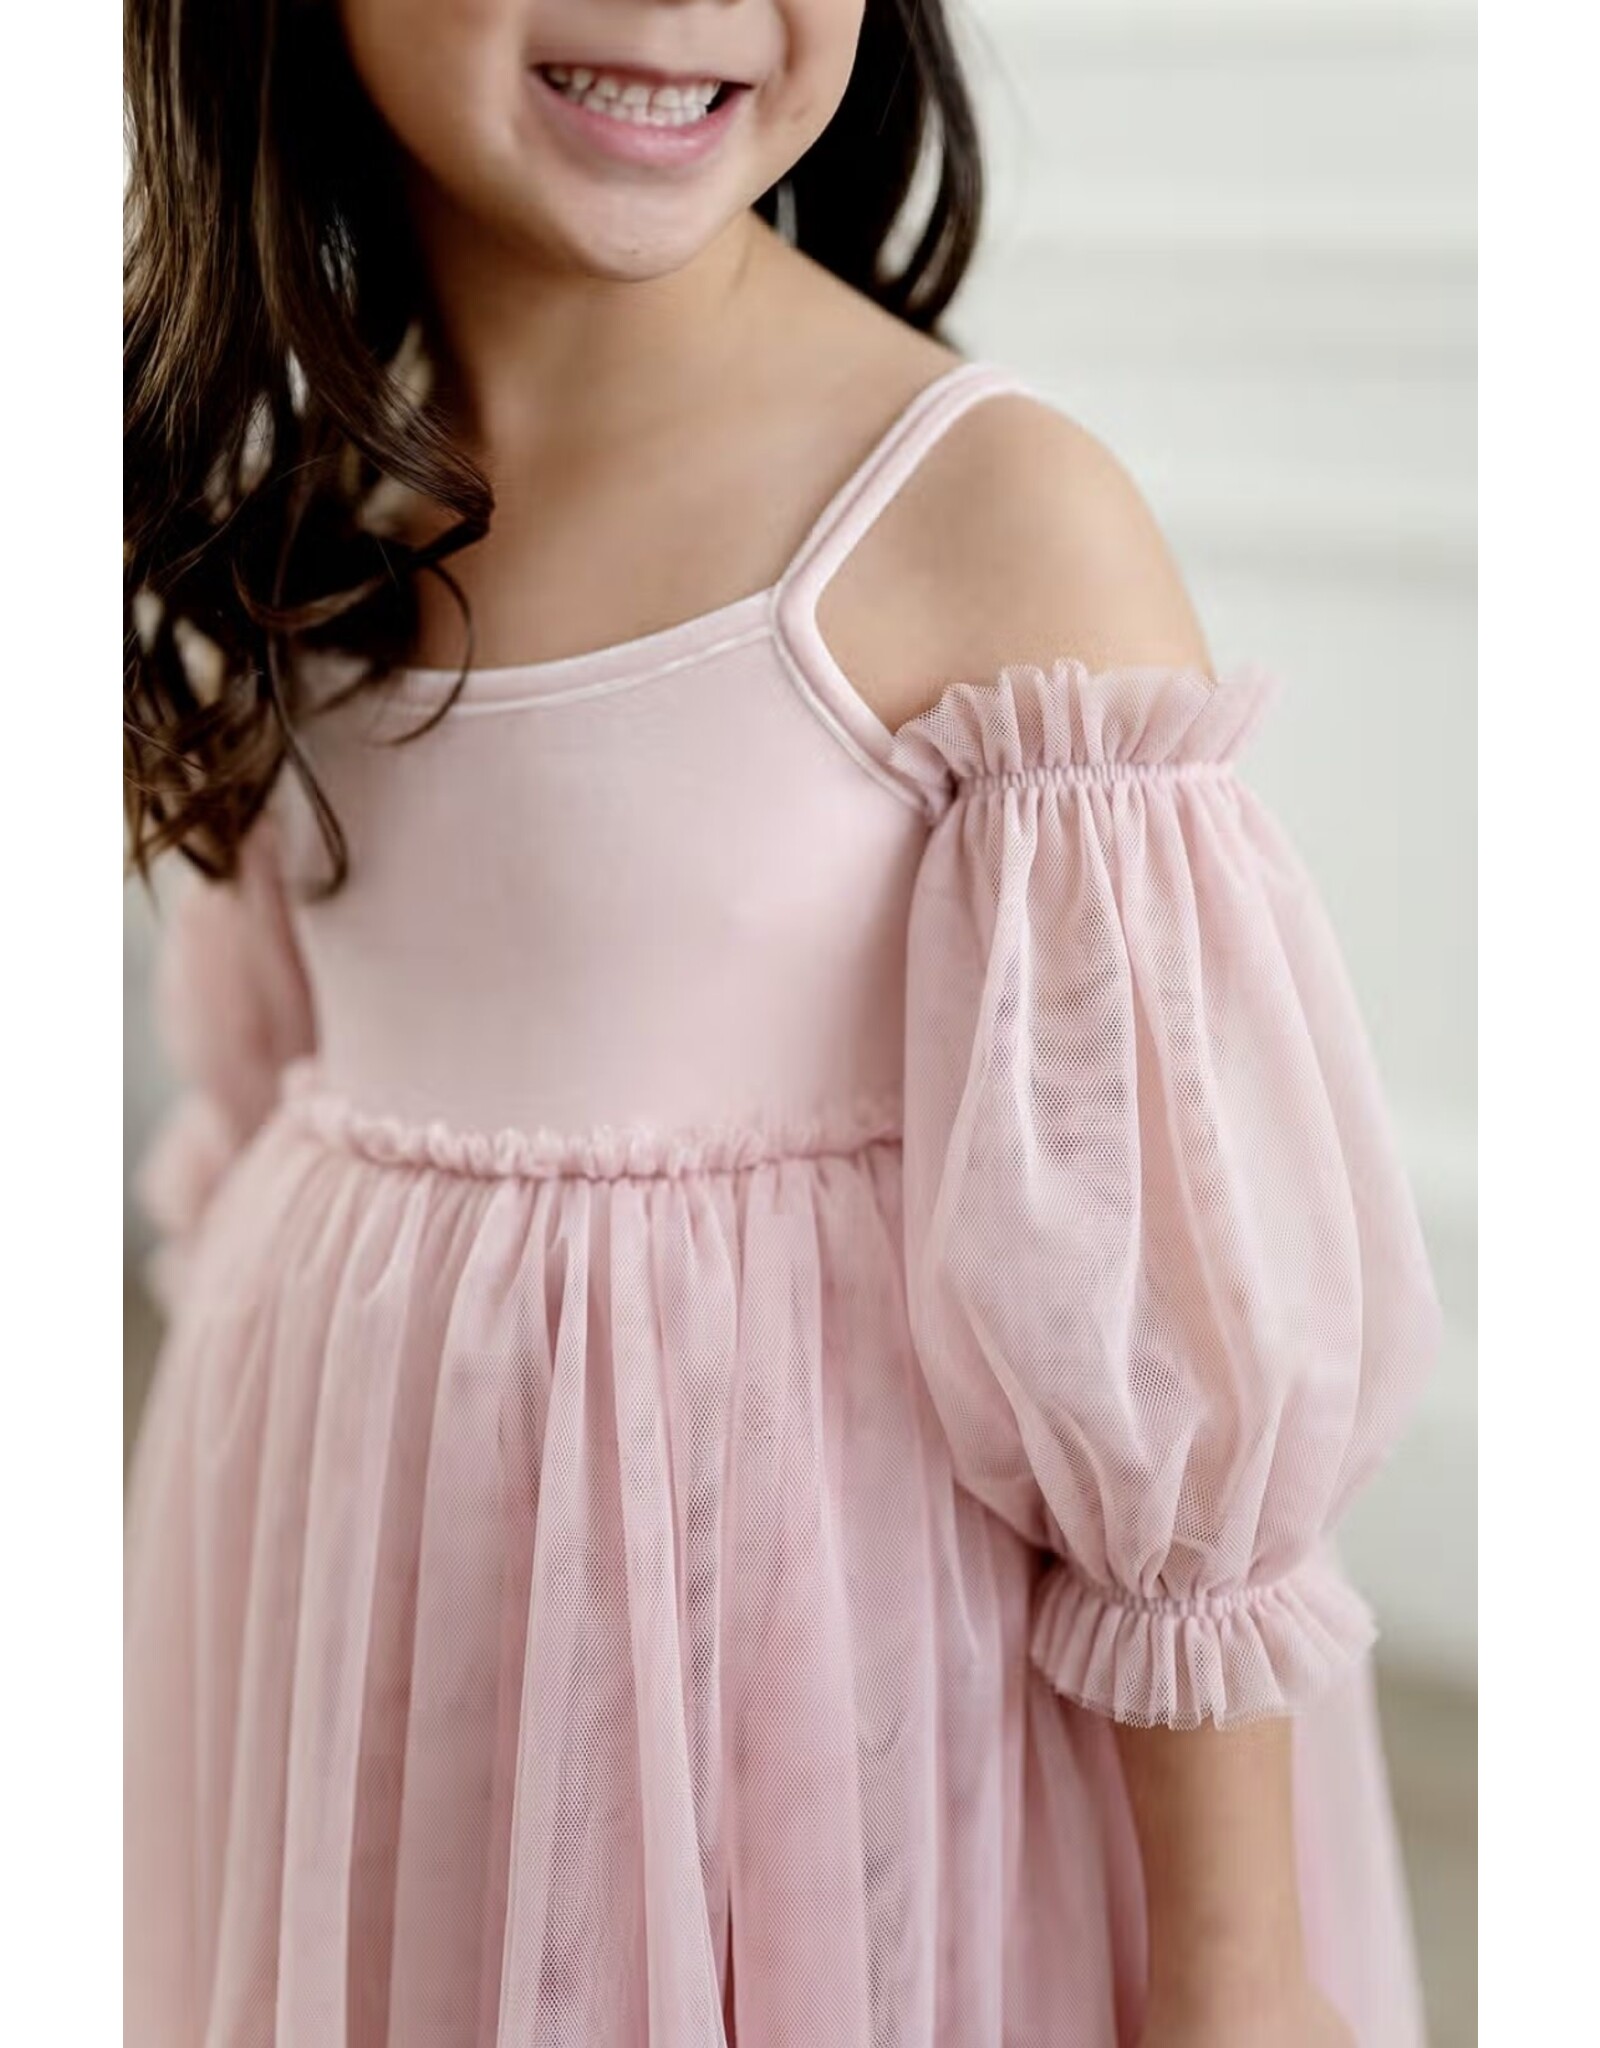 Ollie Jay Ollie Jay- Everly Dress: Pink Rose Ombre